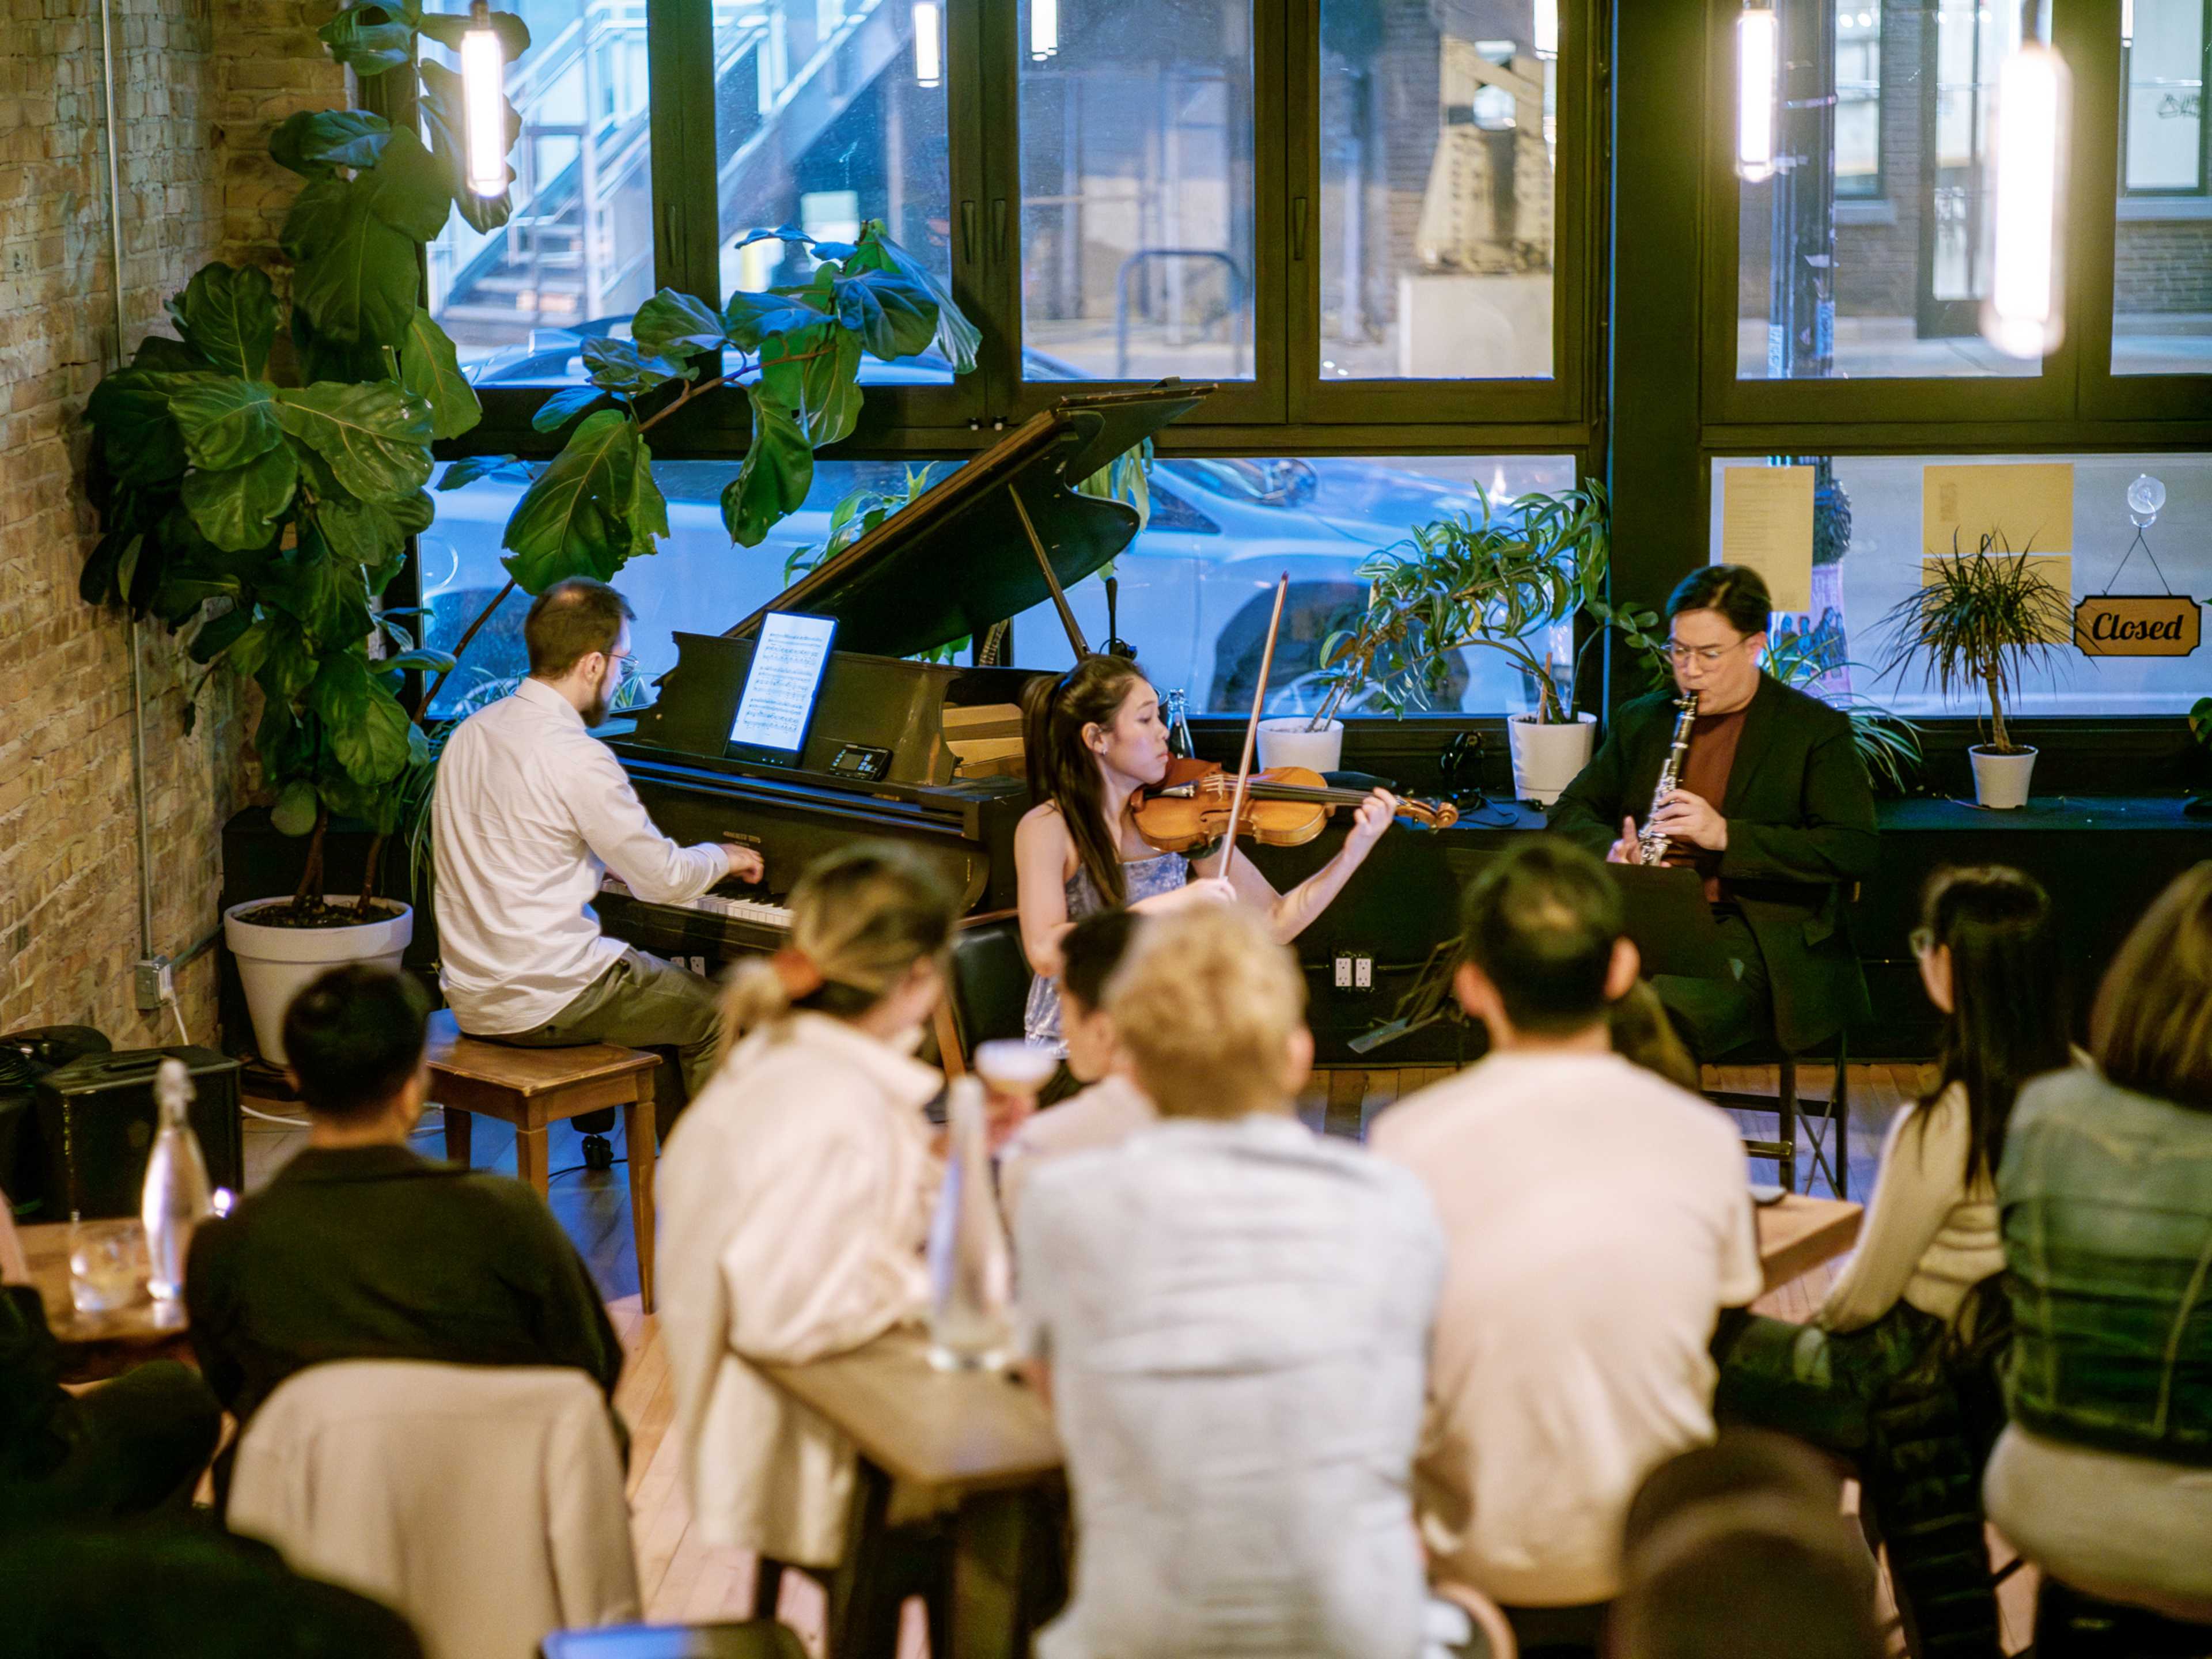 A music trio playing to an audience sitting at tables.